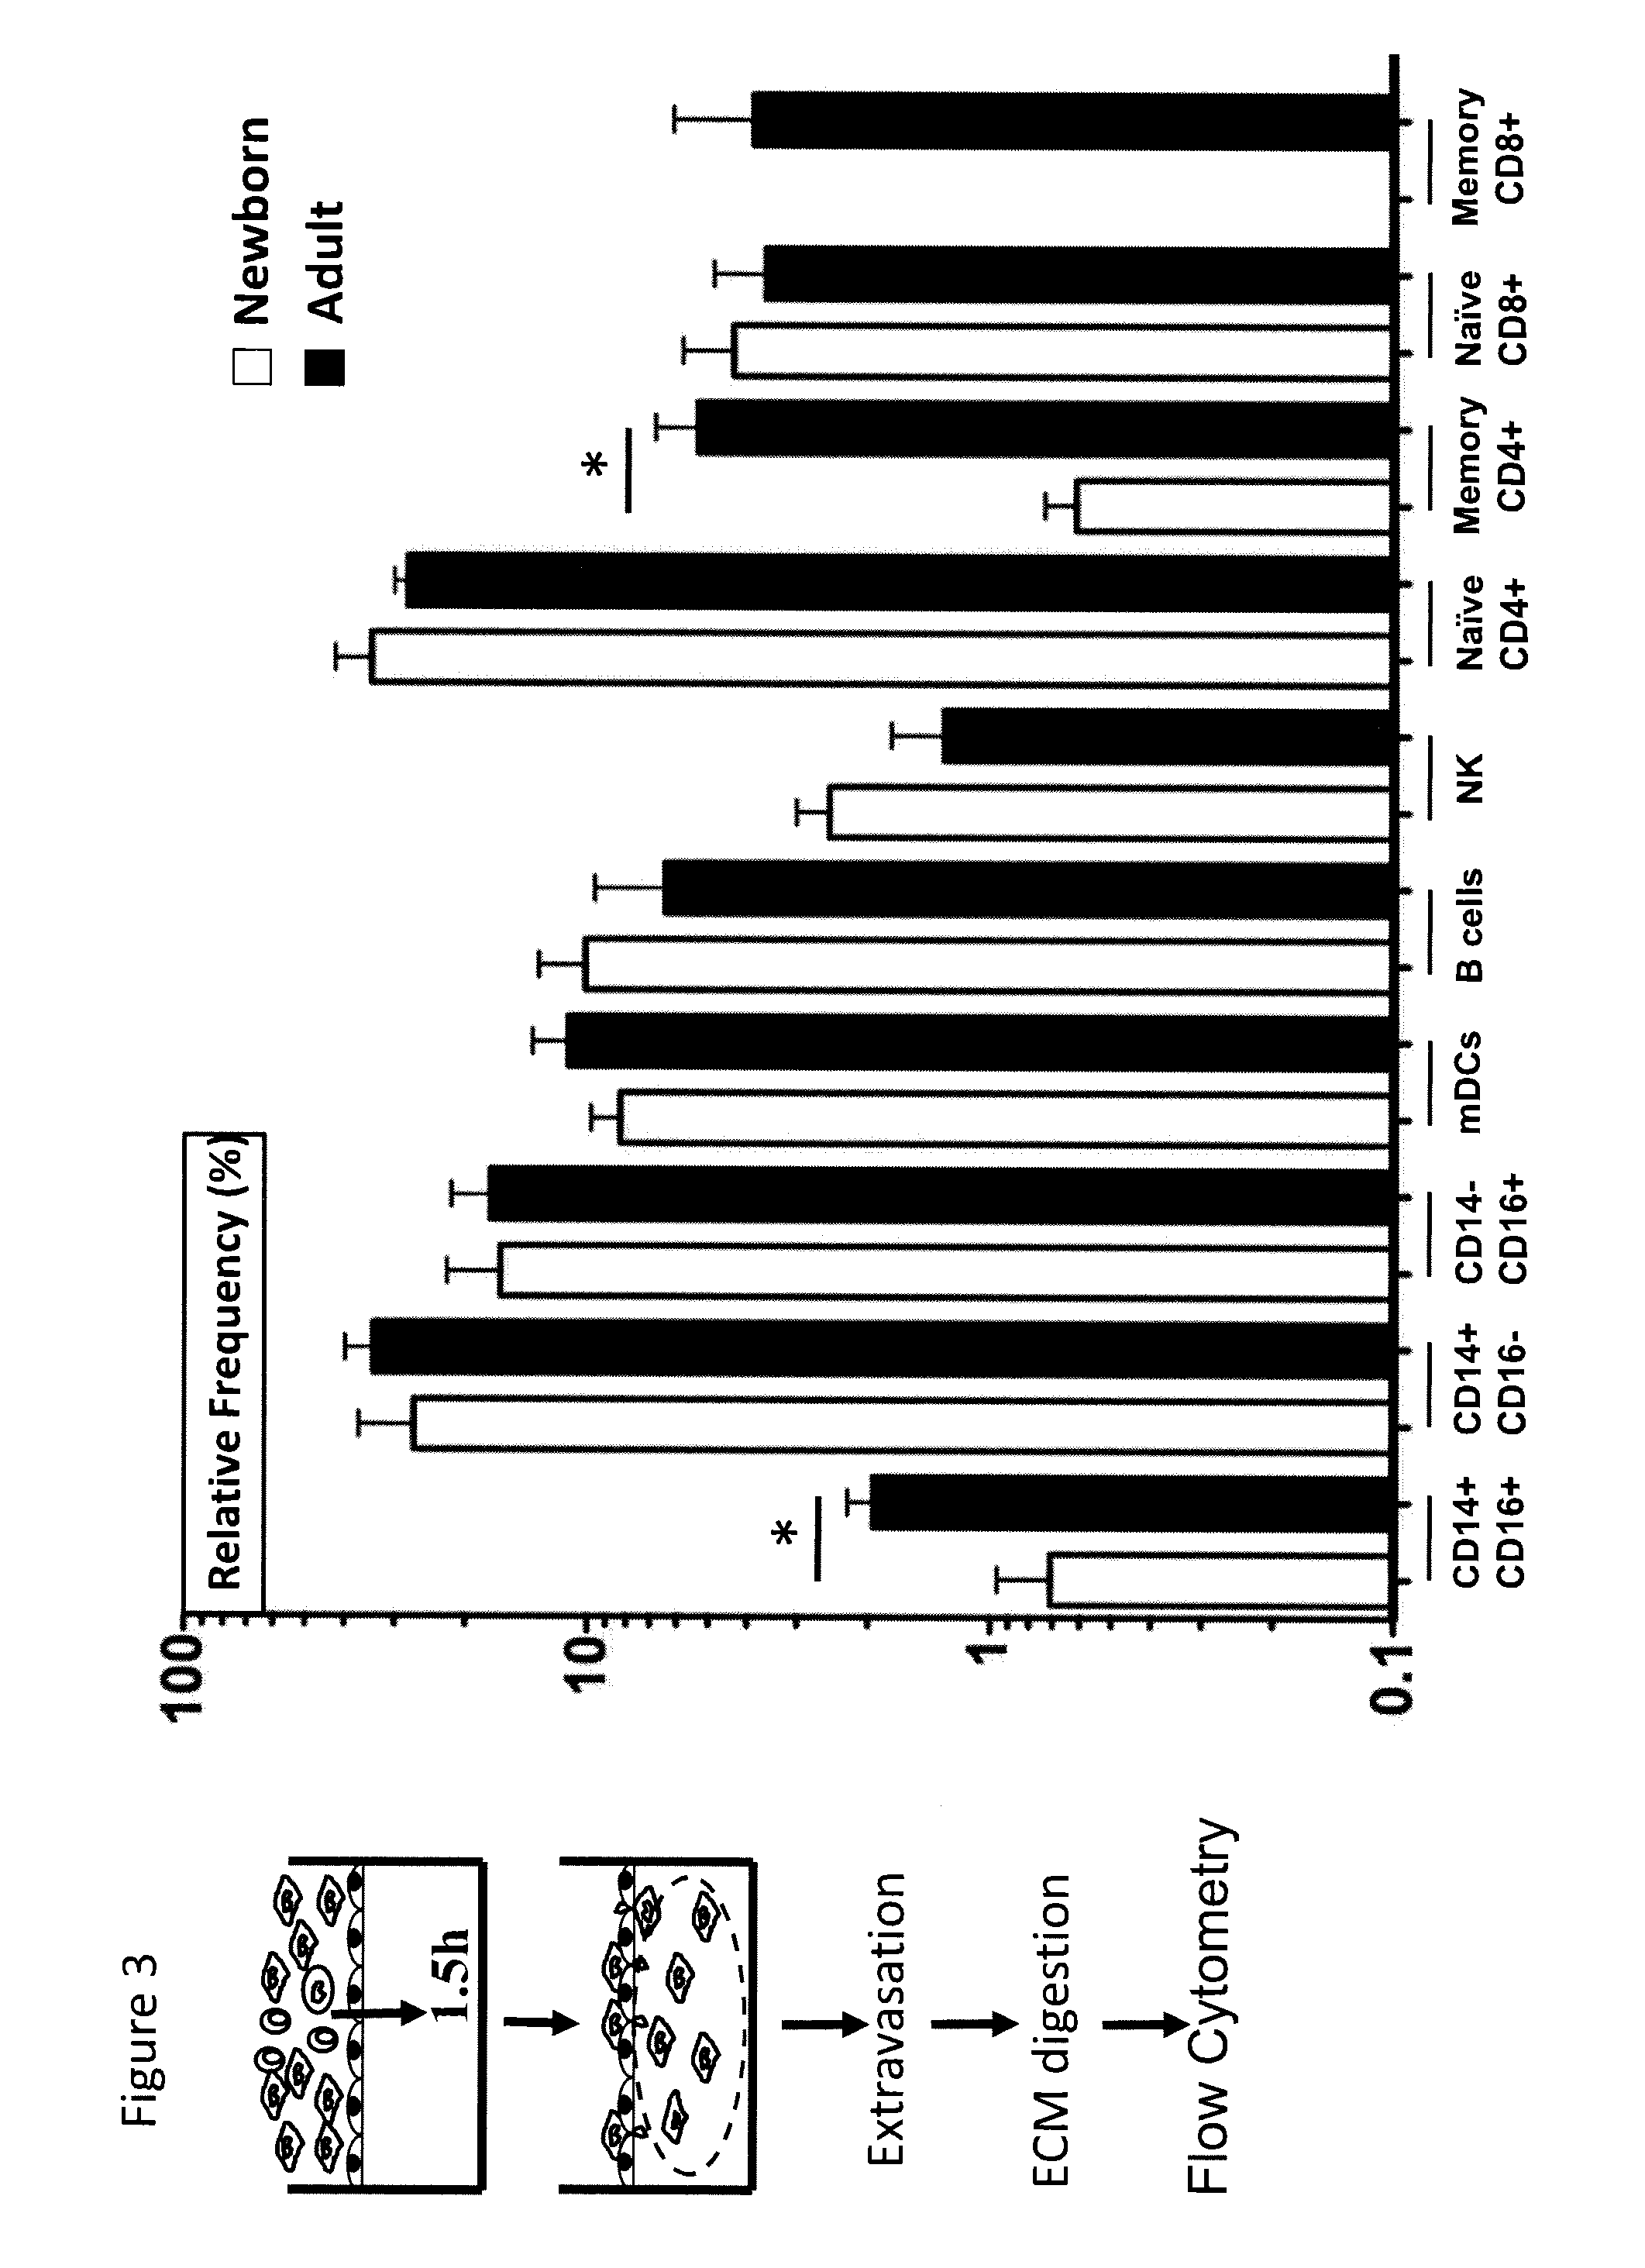 Tissue constructs and uses thereof